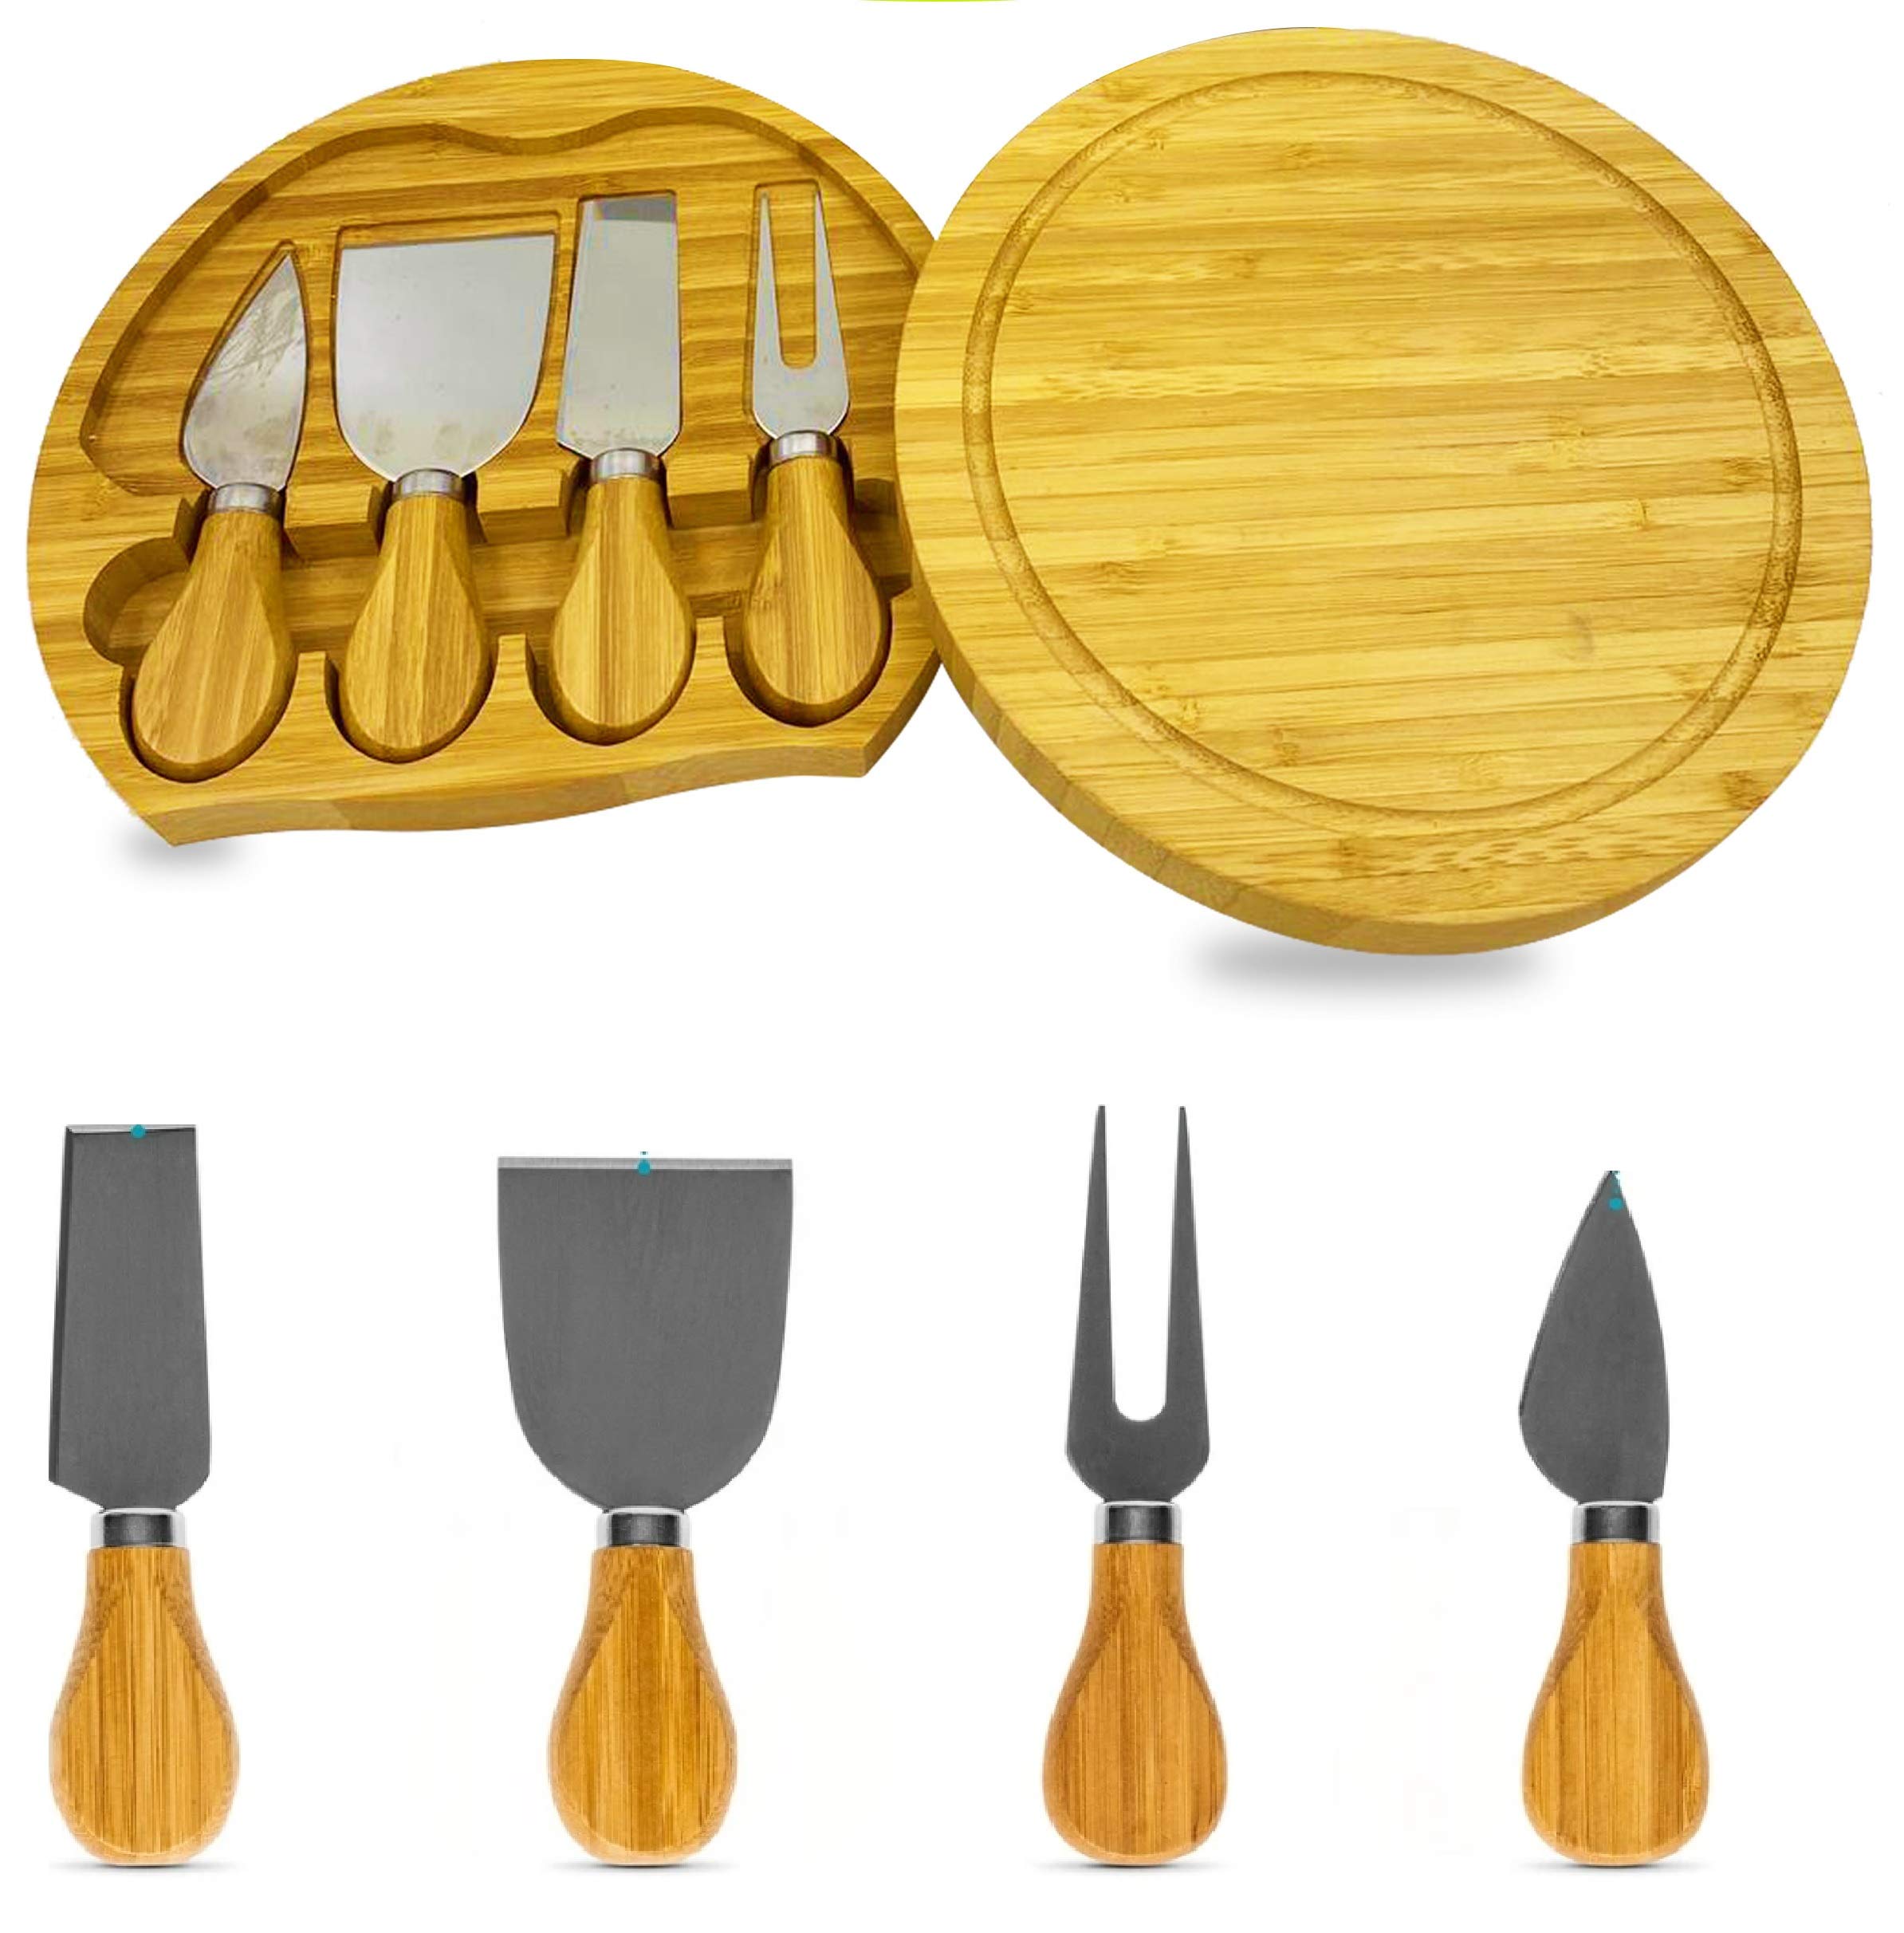 Cheese Board with Cheese Tools Round Cutlery Set Bamboo Charcuterie Board Set With 4 Knives Comes with Slide Out Drawer Platter Serving Tray Durable Best Gift for Wedding Birthday Housewarming (20)